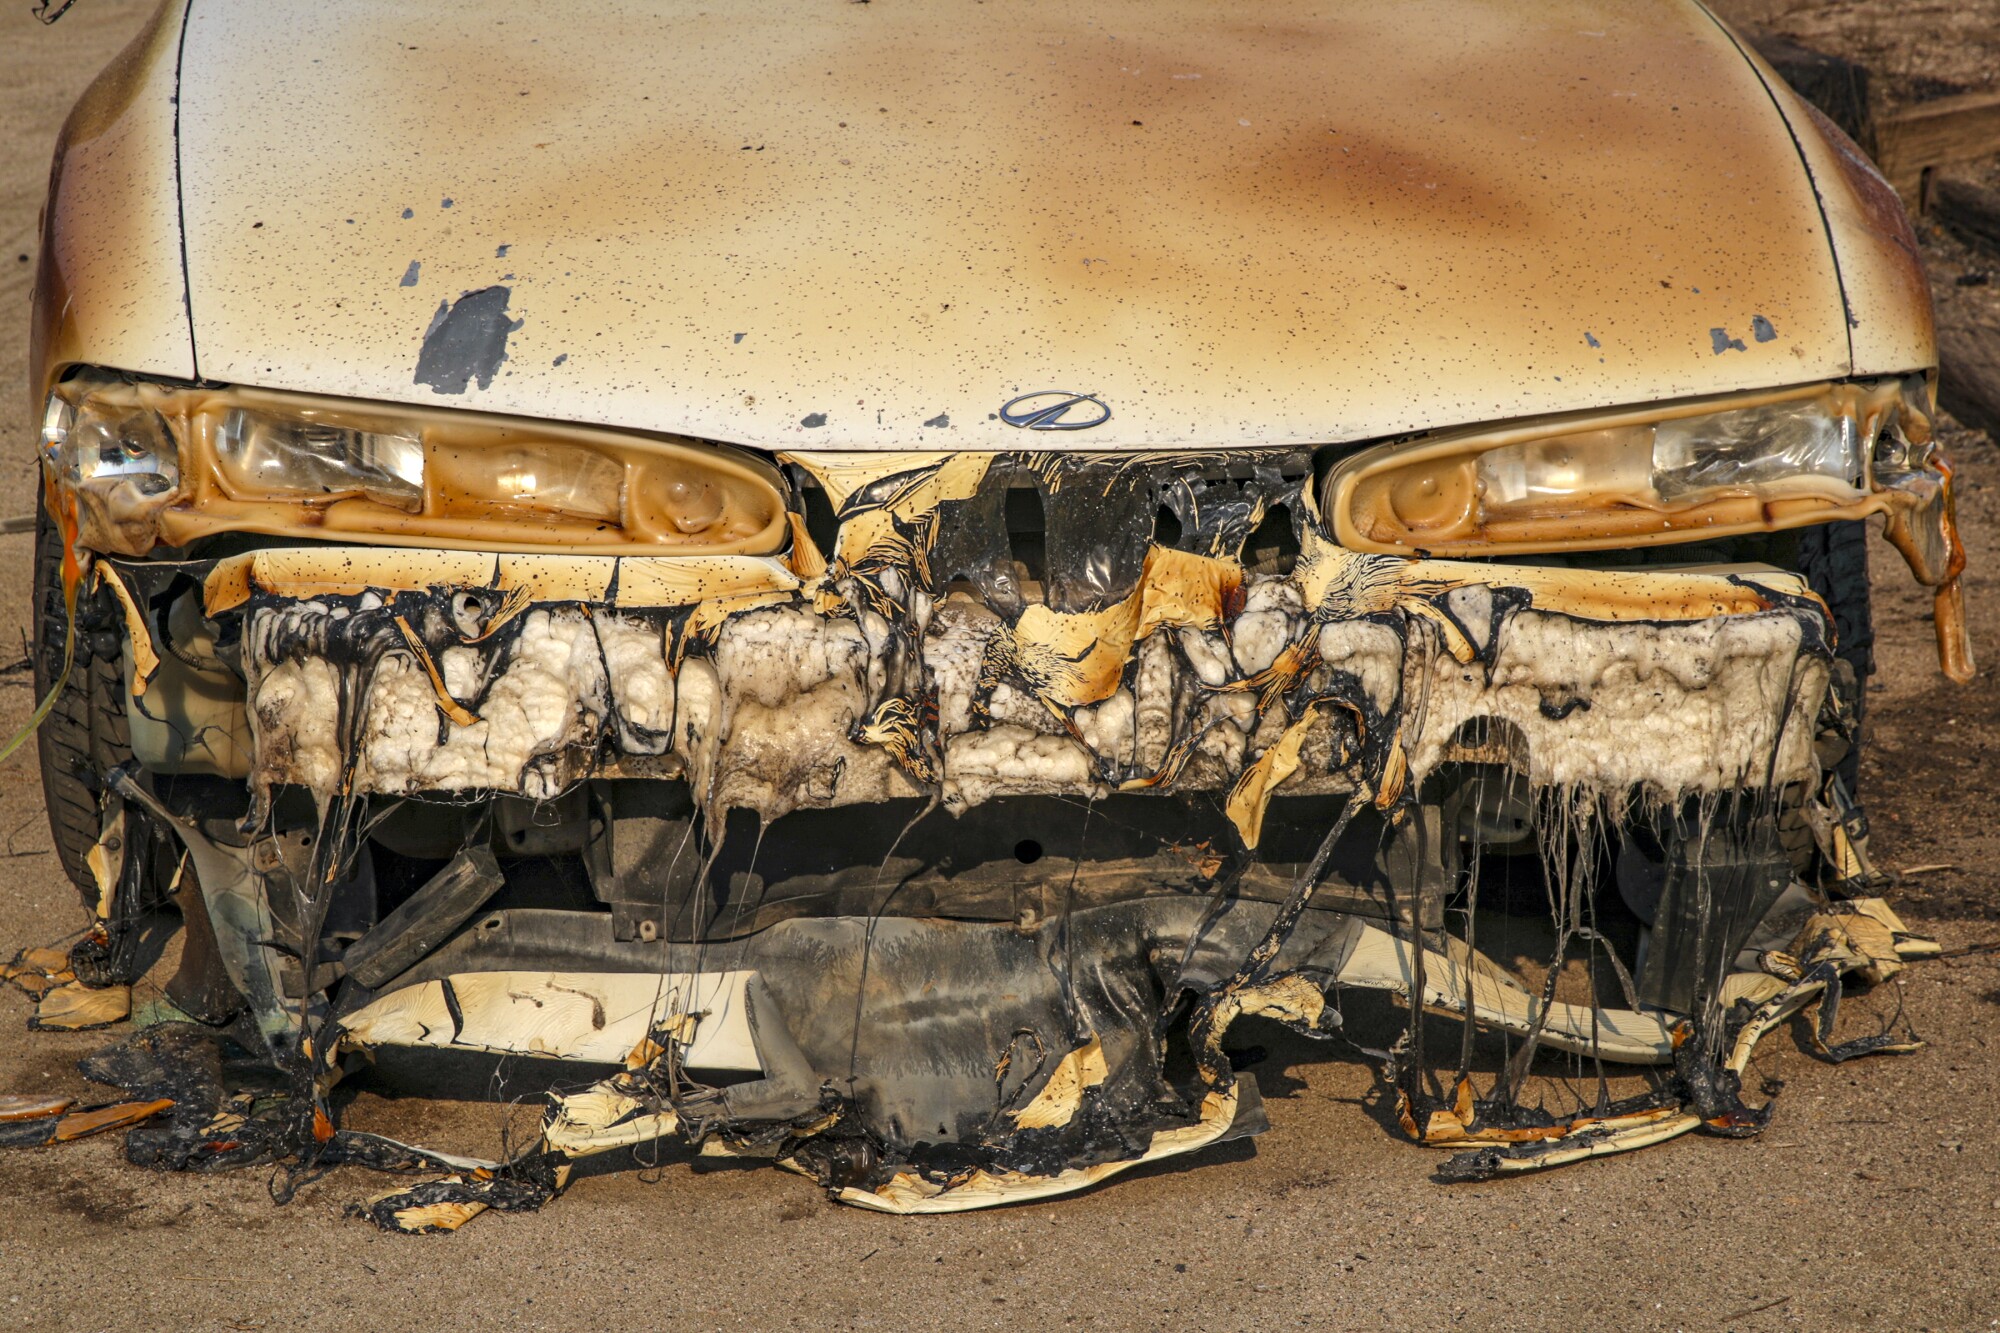 The front of a car on Gibble Road melted in the heat of the Fairview fire